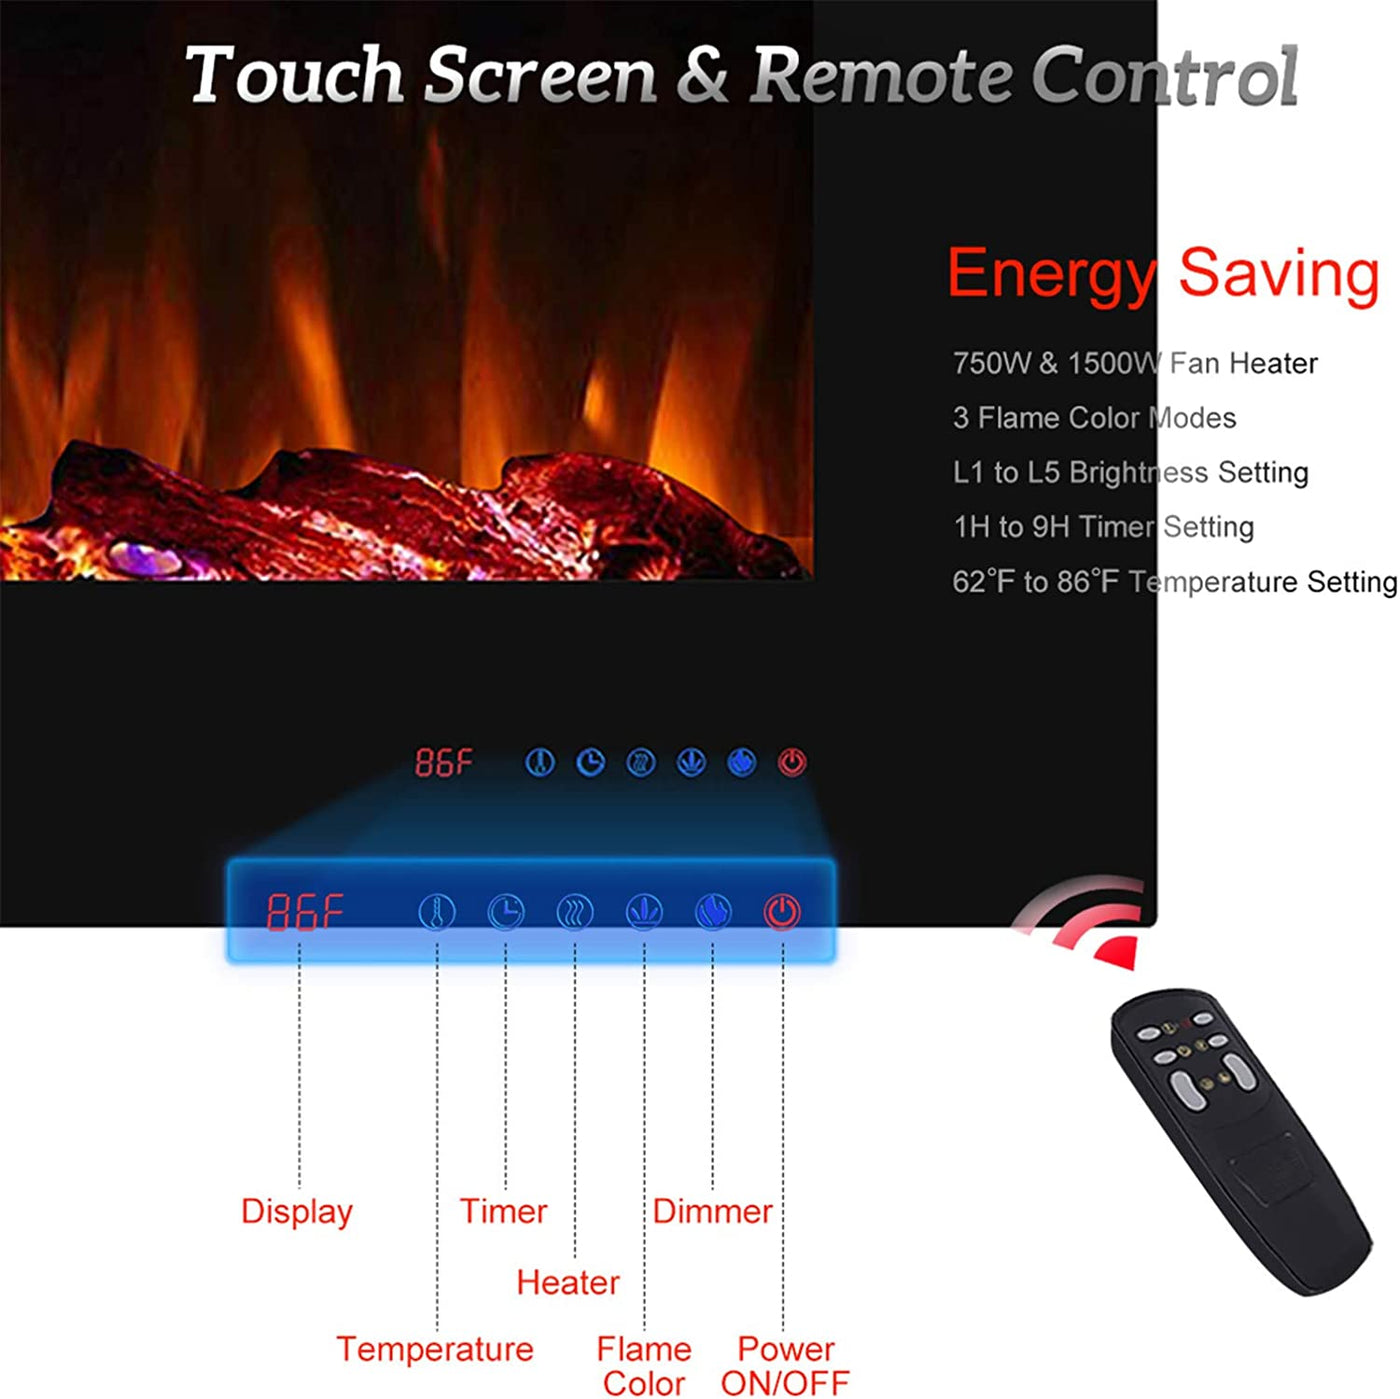 Valuxhome 36 Electric Fireplace, Touchscreen, 750/1500W, Black, 36" L21 H - $275